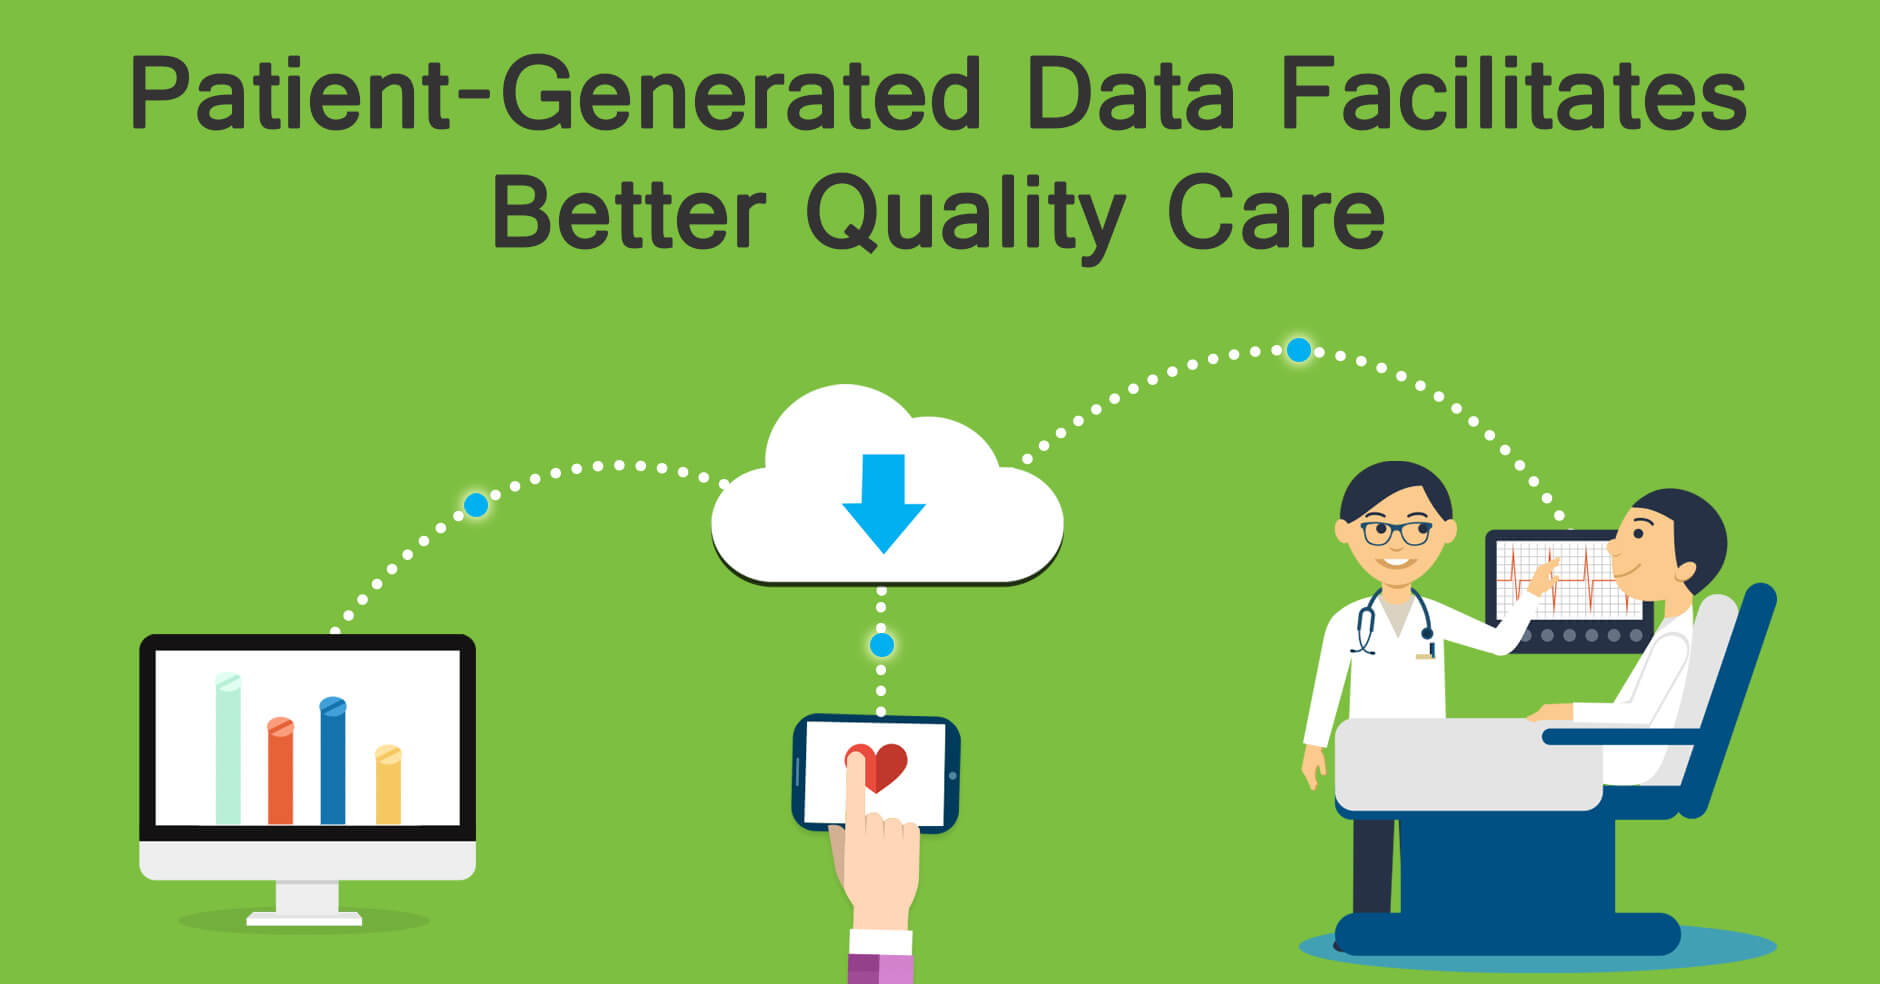 Patient-generated Data Facilitates Better Quality Care